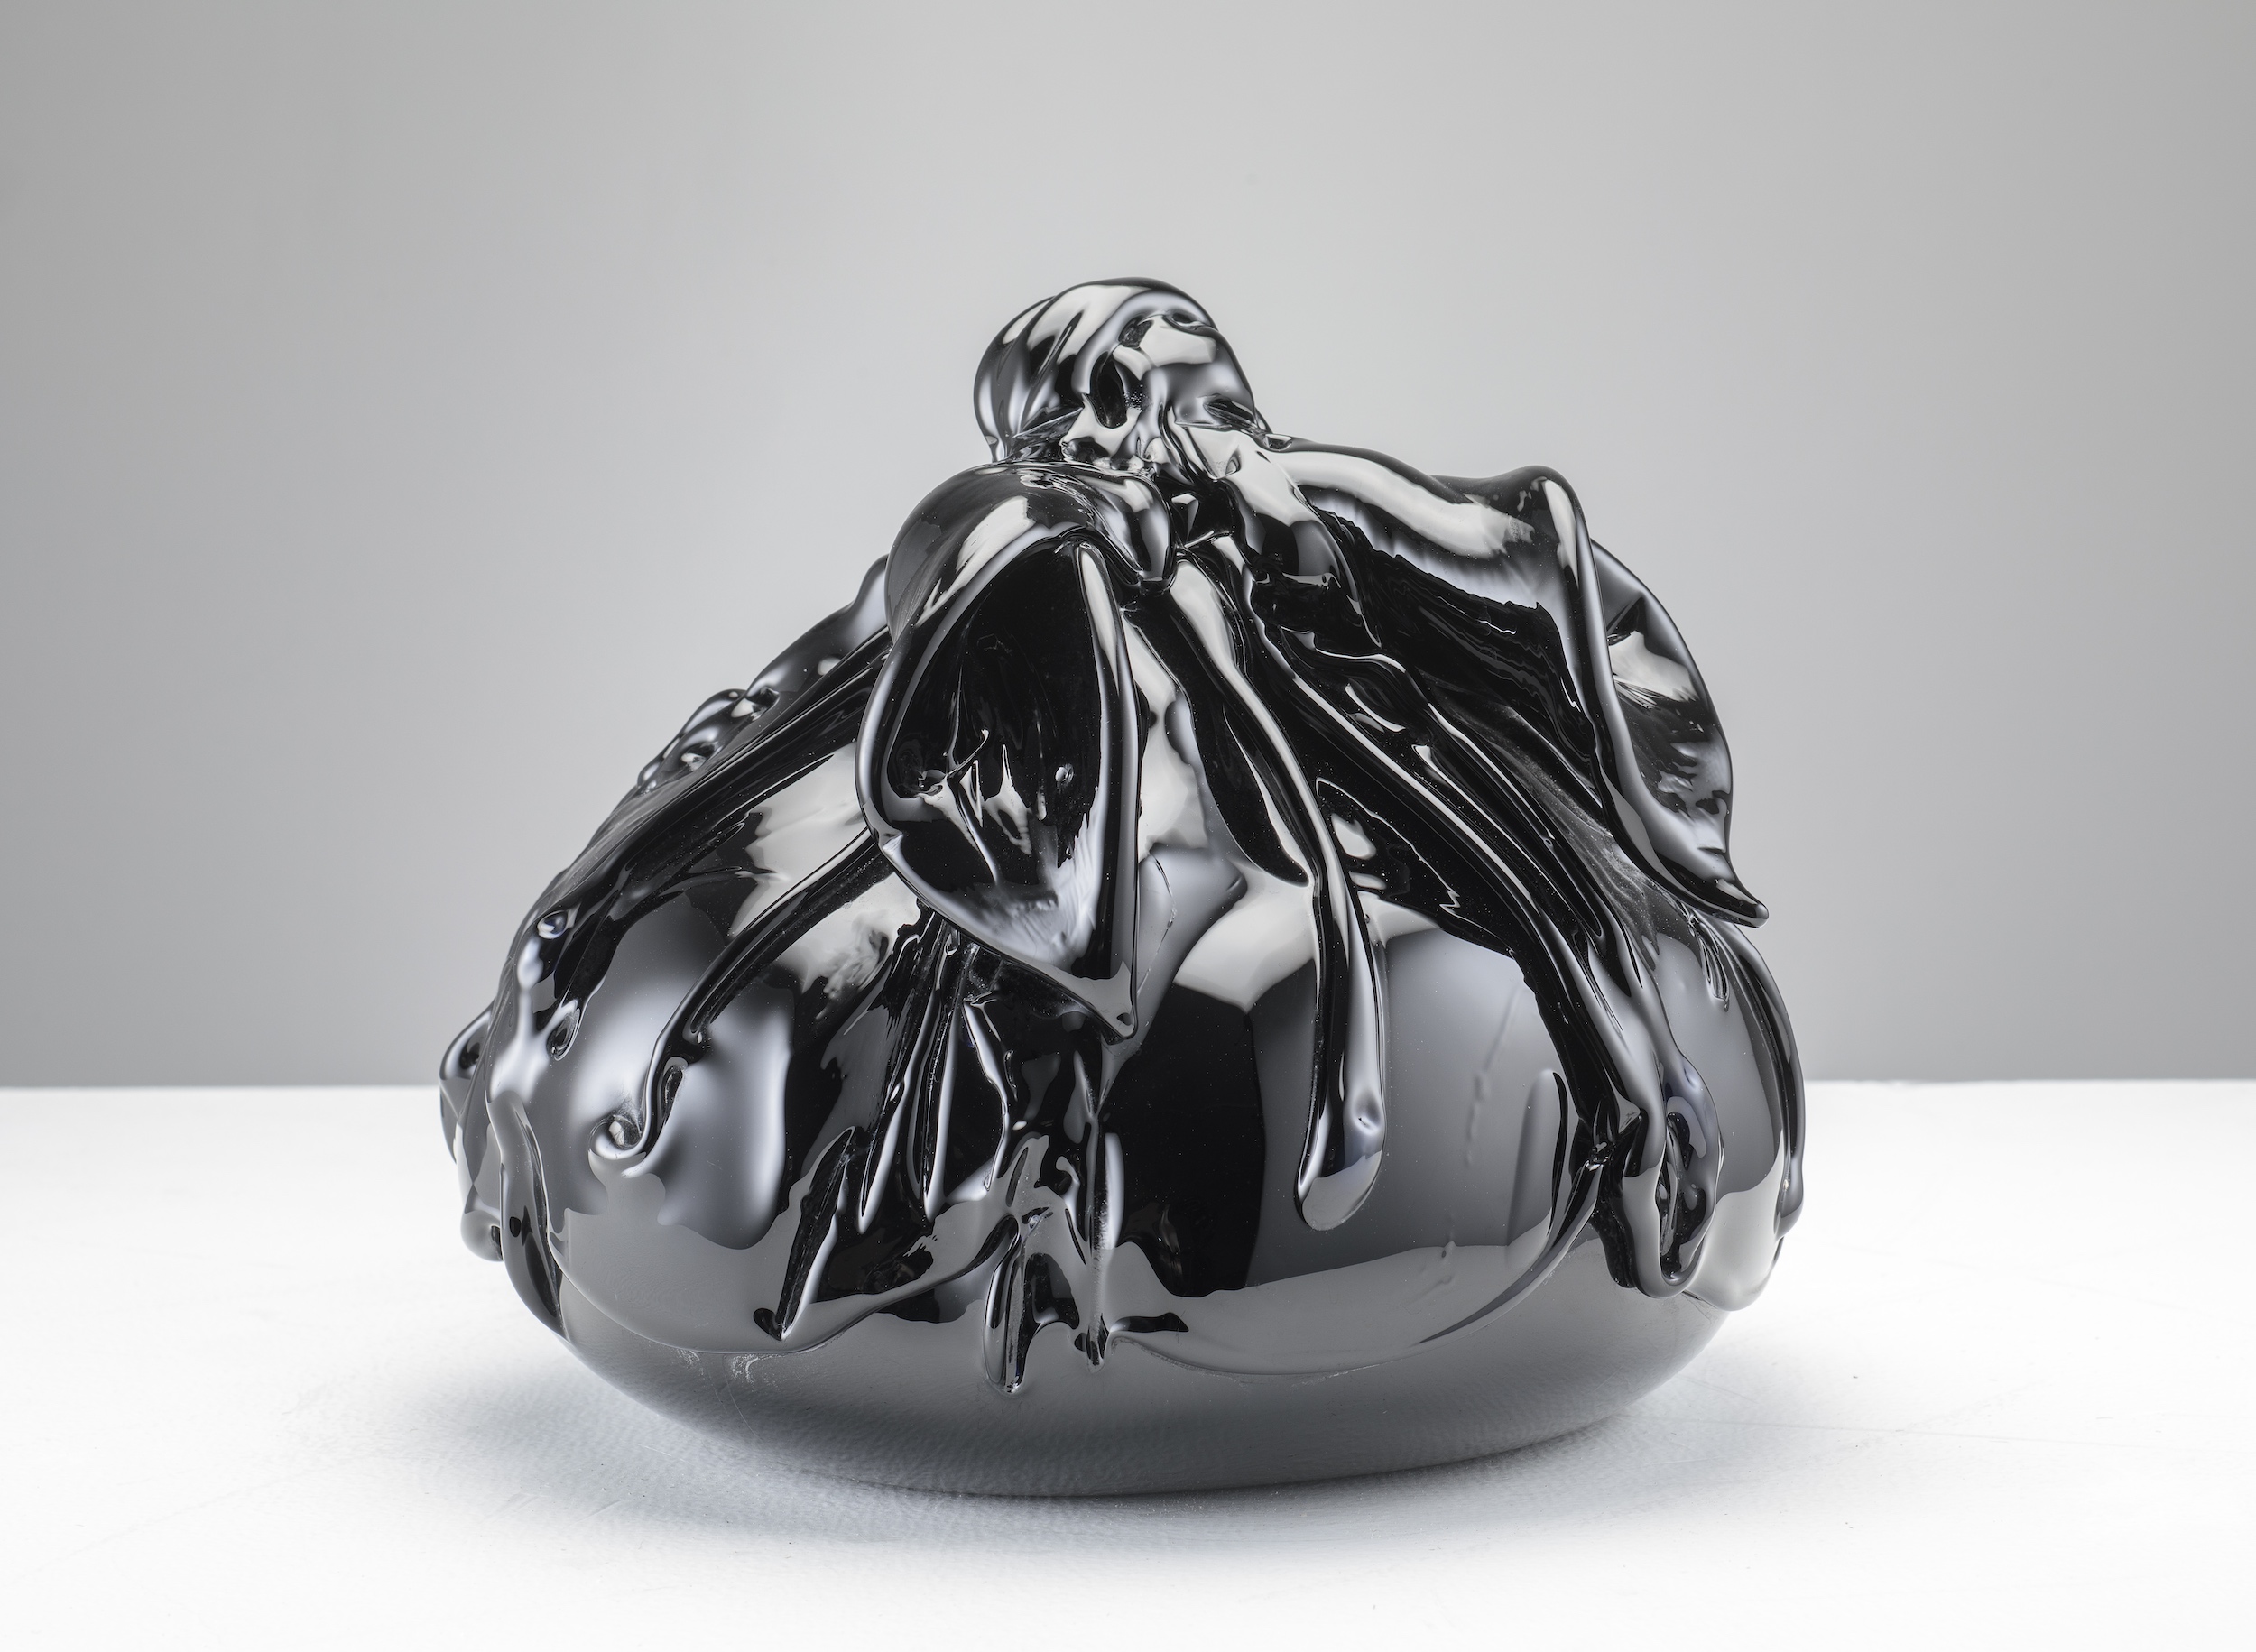 A photograph of an artwork. A round object is wrapped in shiny black material.